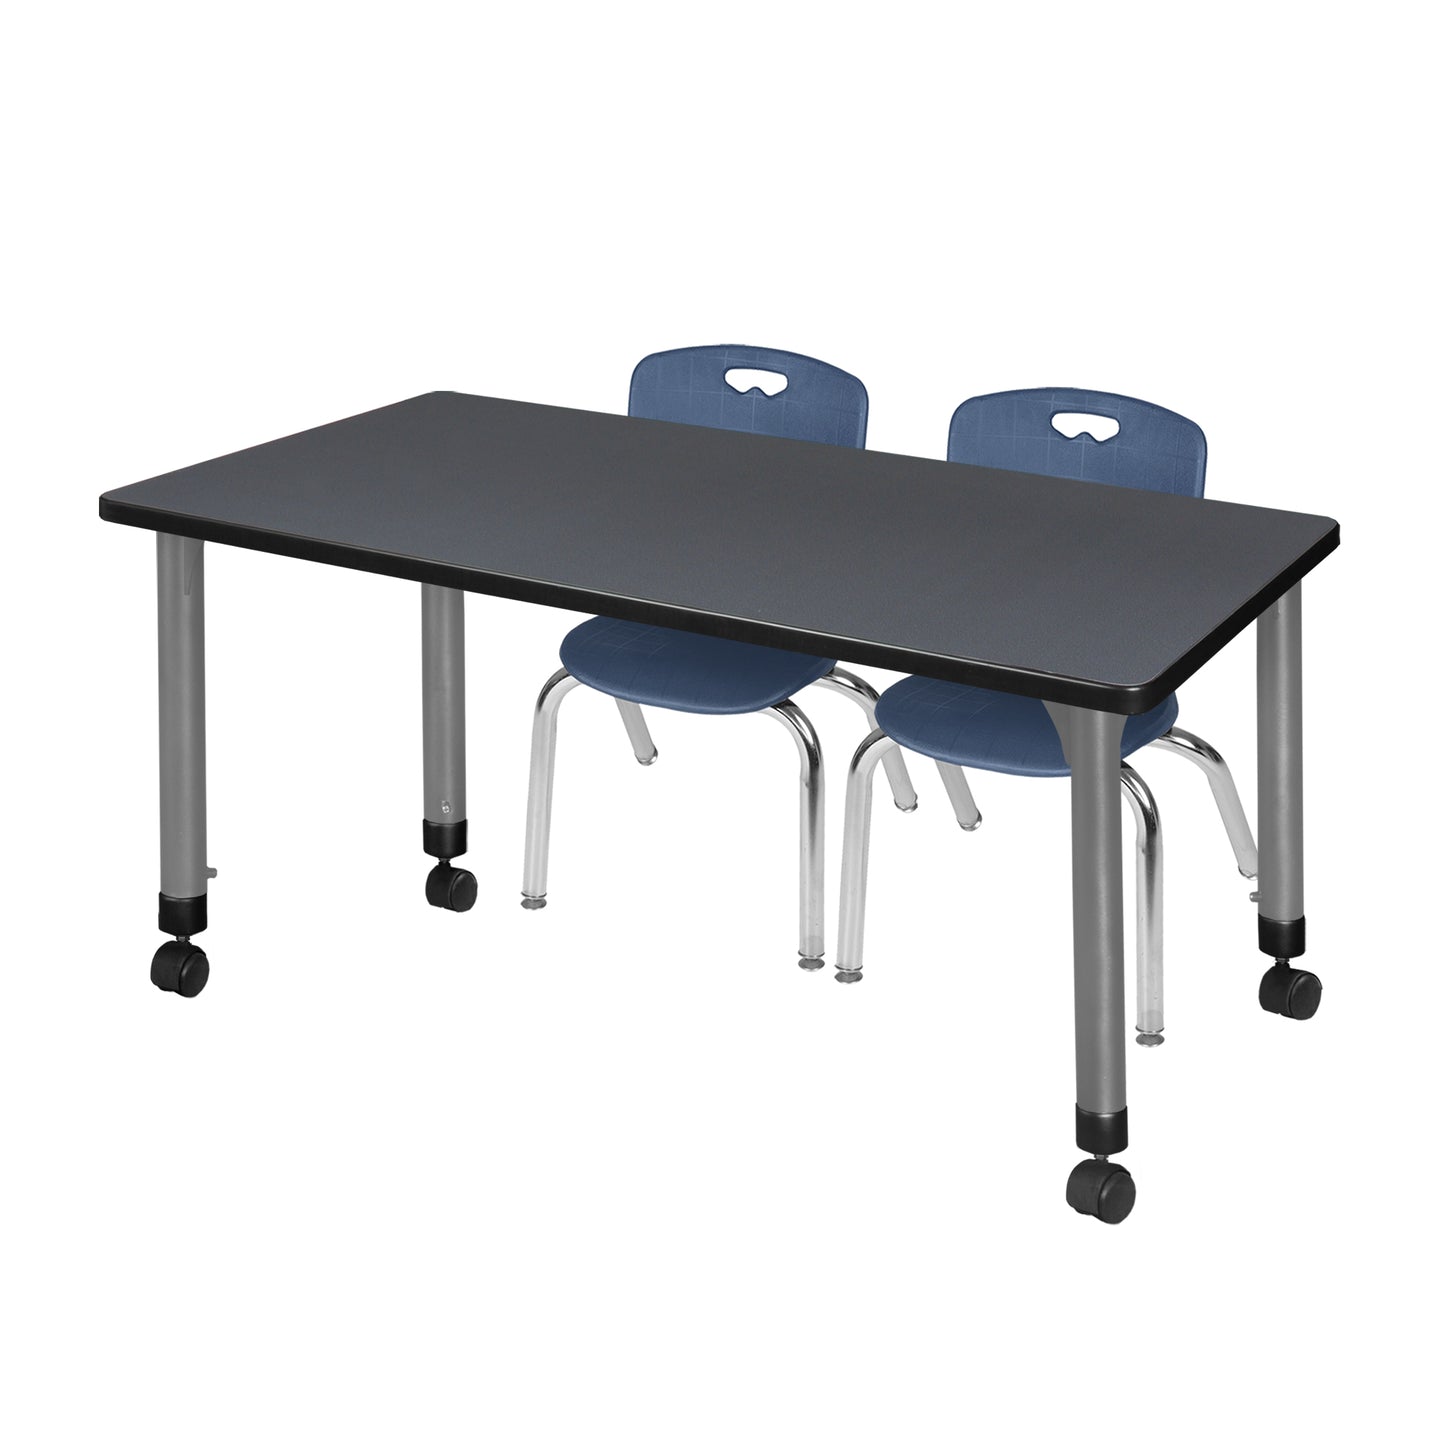 Regency Kee 48 x 30 in. Adjustable Classroom Table & 2 Andy 12 in. Stack Chairs